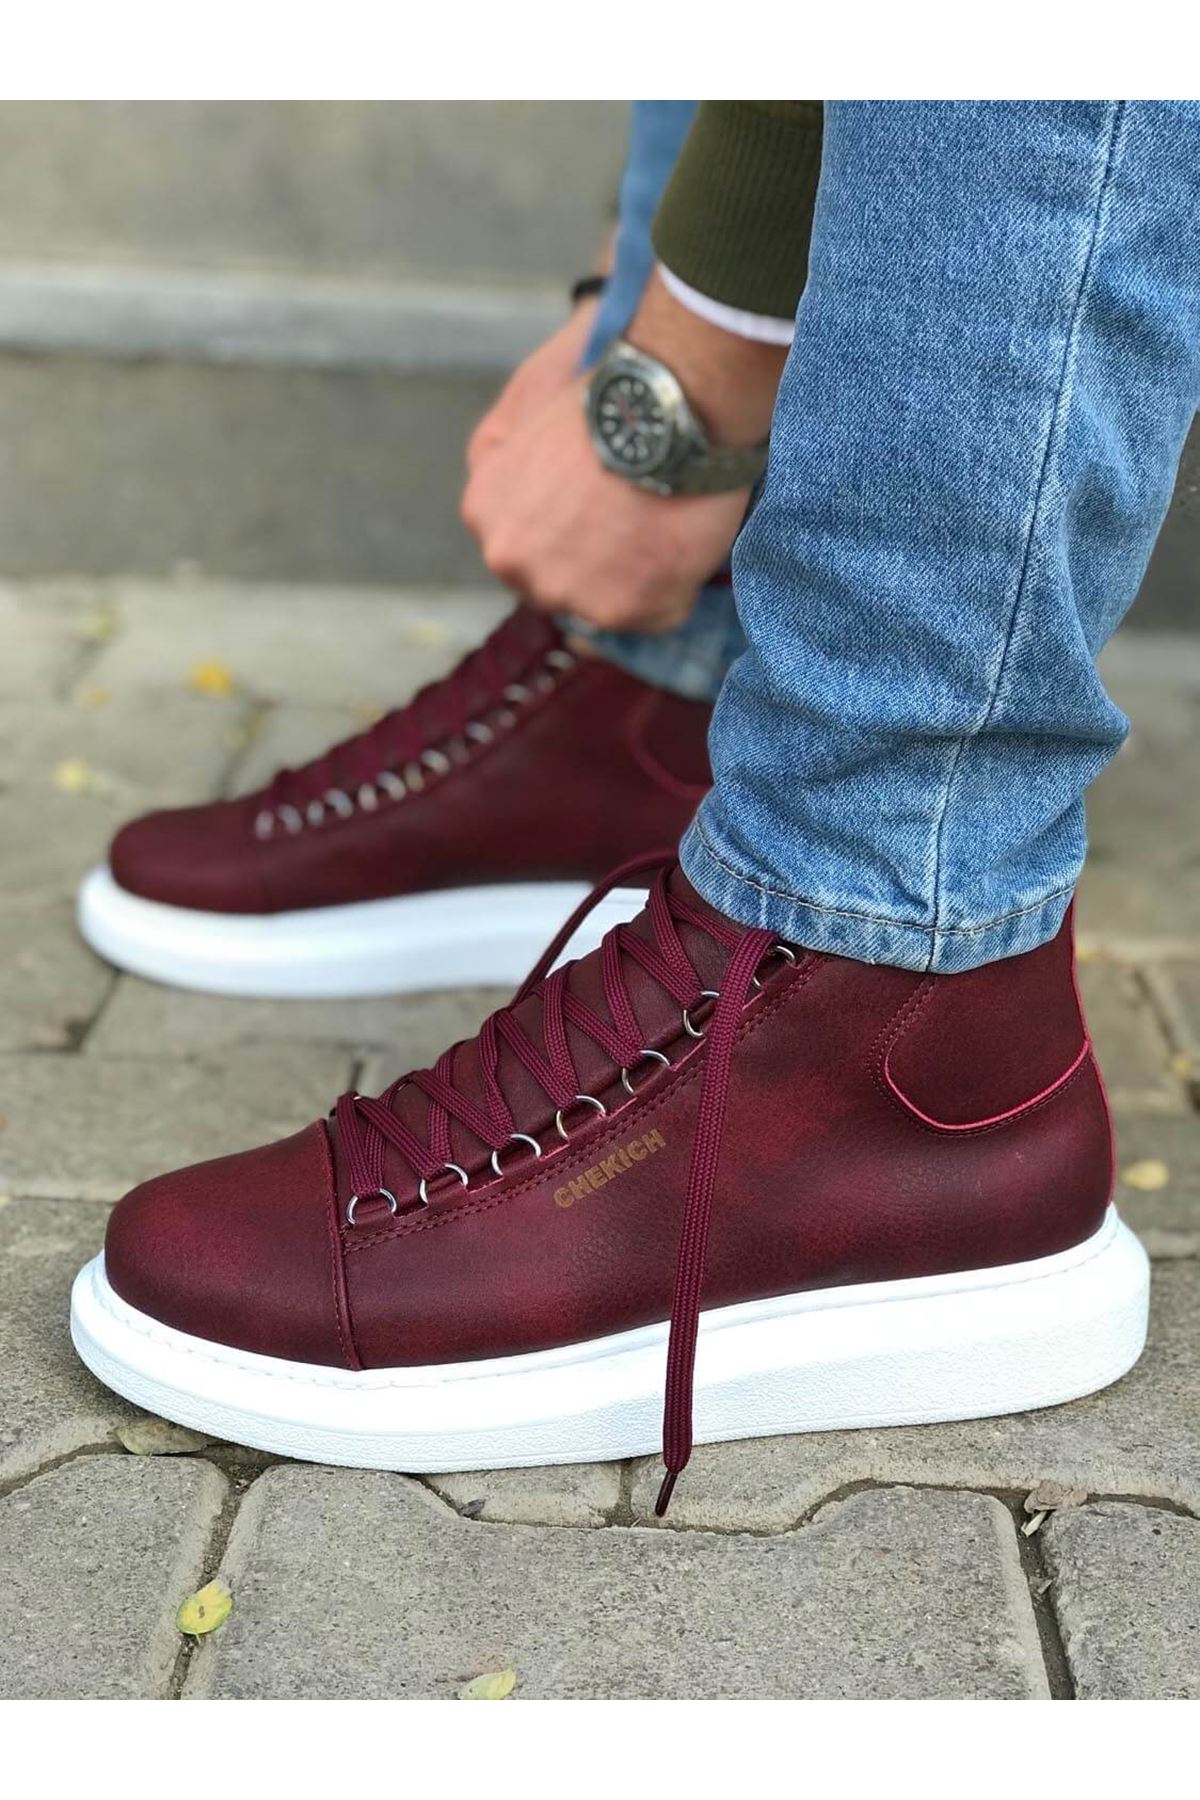 Chekich Men's and Women's Shoes Claret Red Faux Leather Fall Season Lace Up Unisex Sneakers Comfortable Ankle Gentlemen's Fashion Office Trekking Outdoor Light Odorless Breathable Warm Boots Non Slip Snow CH258 V2